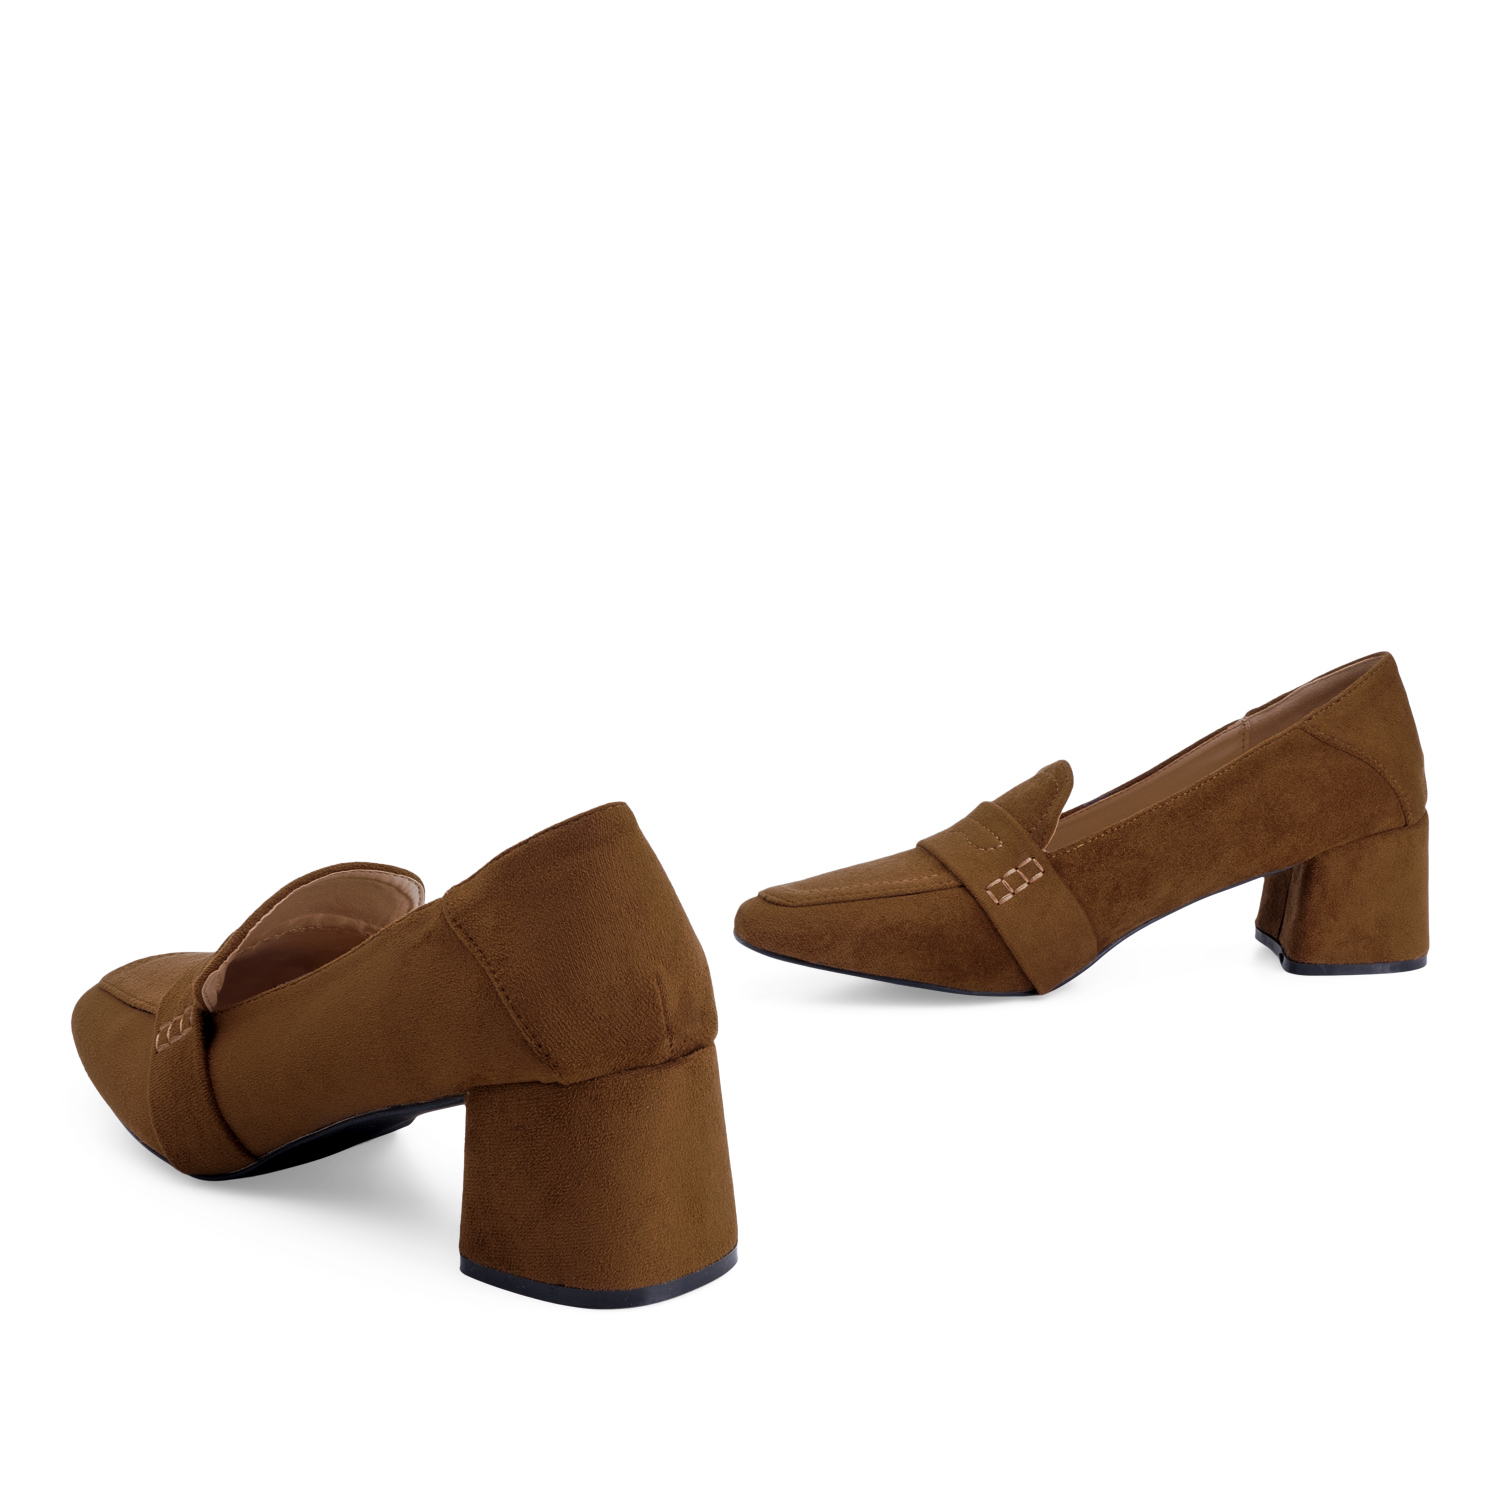 Heeled moccasin in camel colored faux suede 